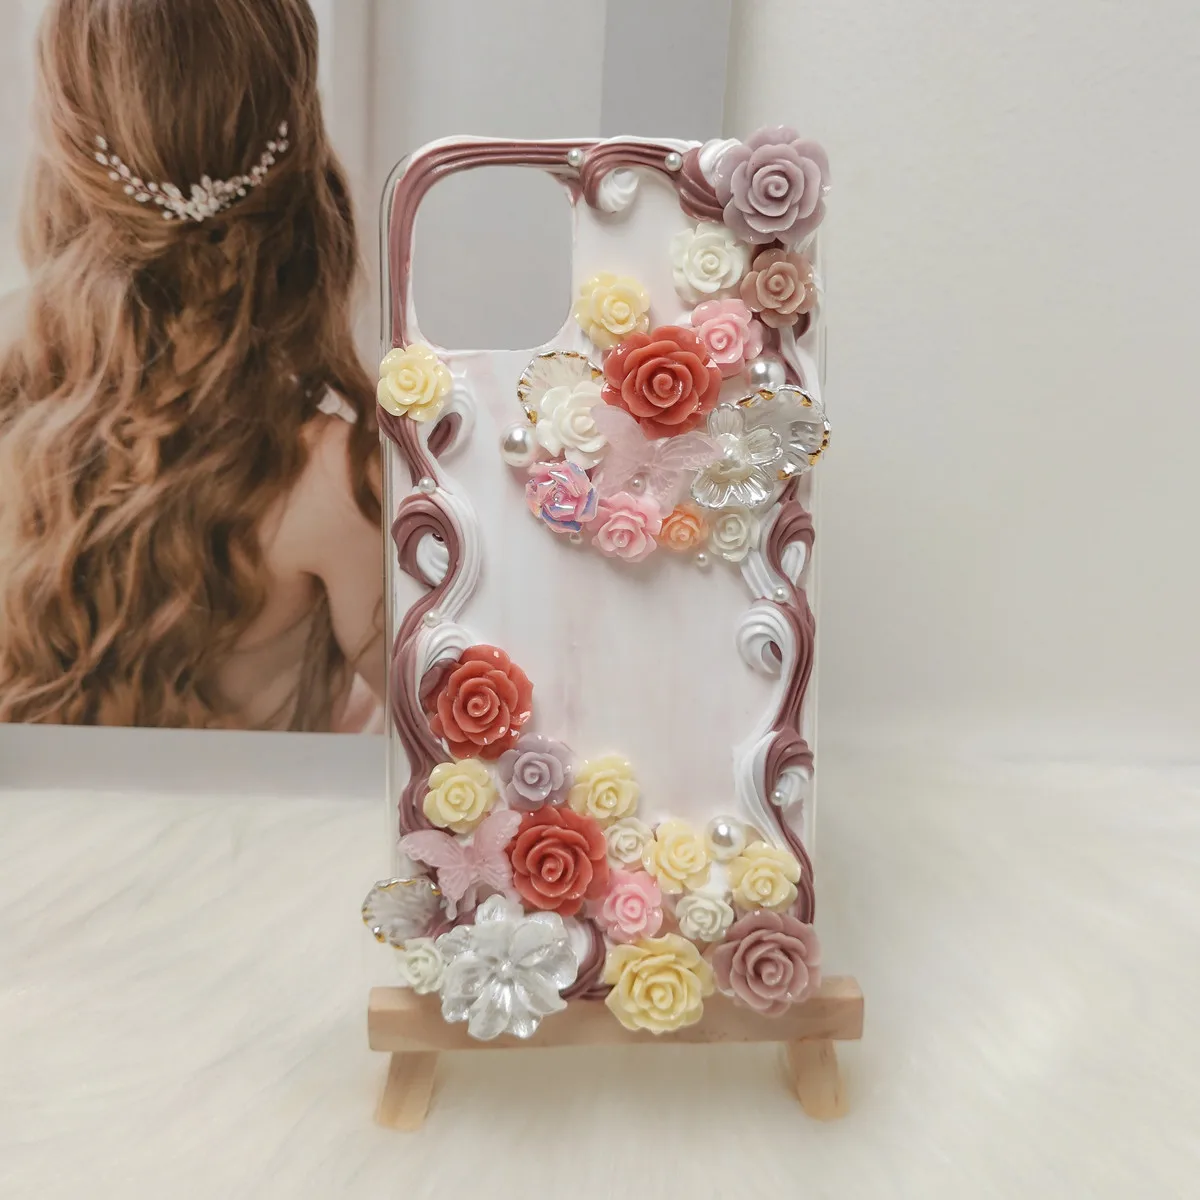 Handmade For iPhone 11/12 pro max case 3D Rose Flower Angel Butterfly iP 7/8plus phone shell iP 12 Mini DIY creamy cover SE 2020